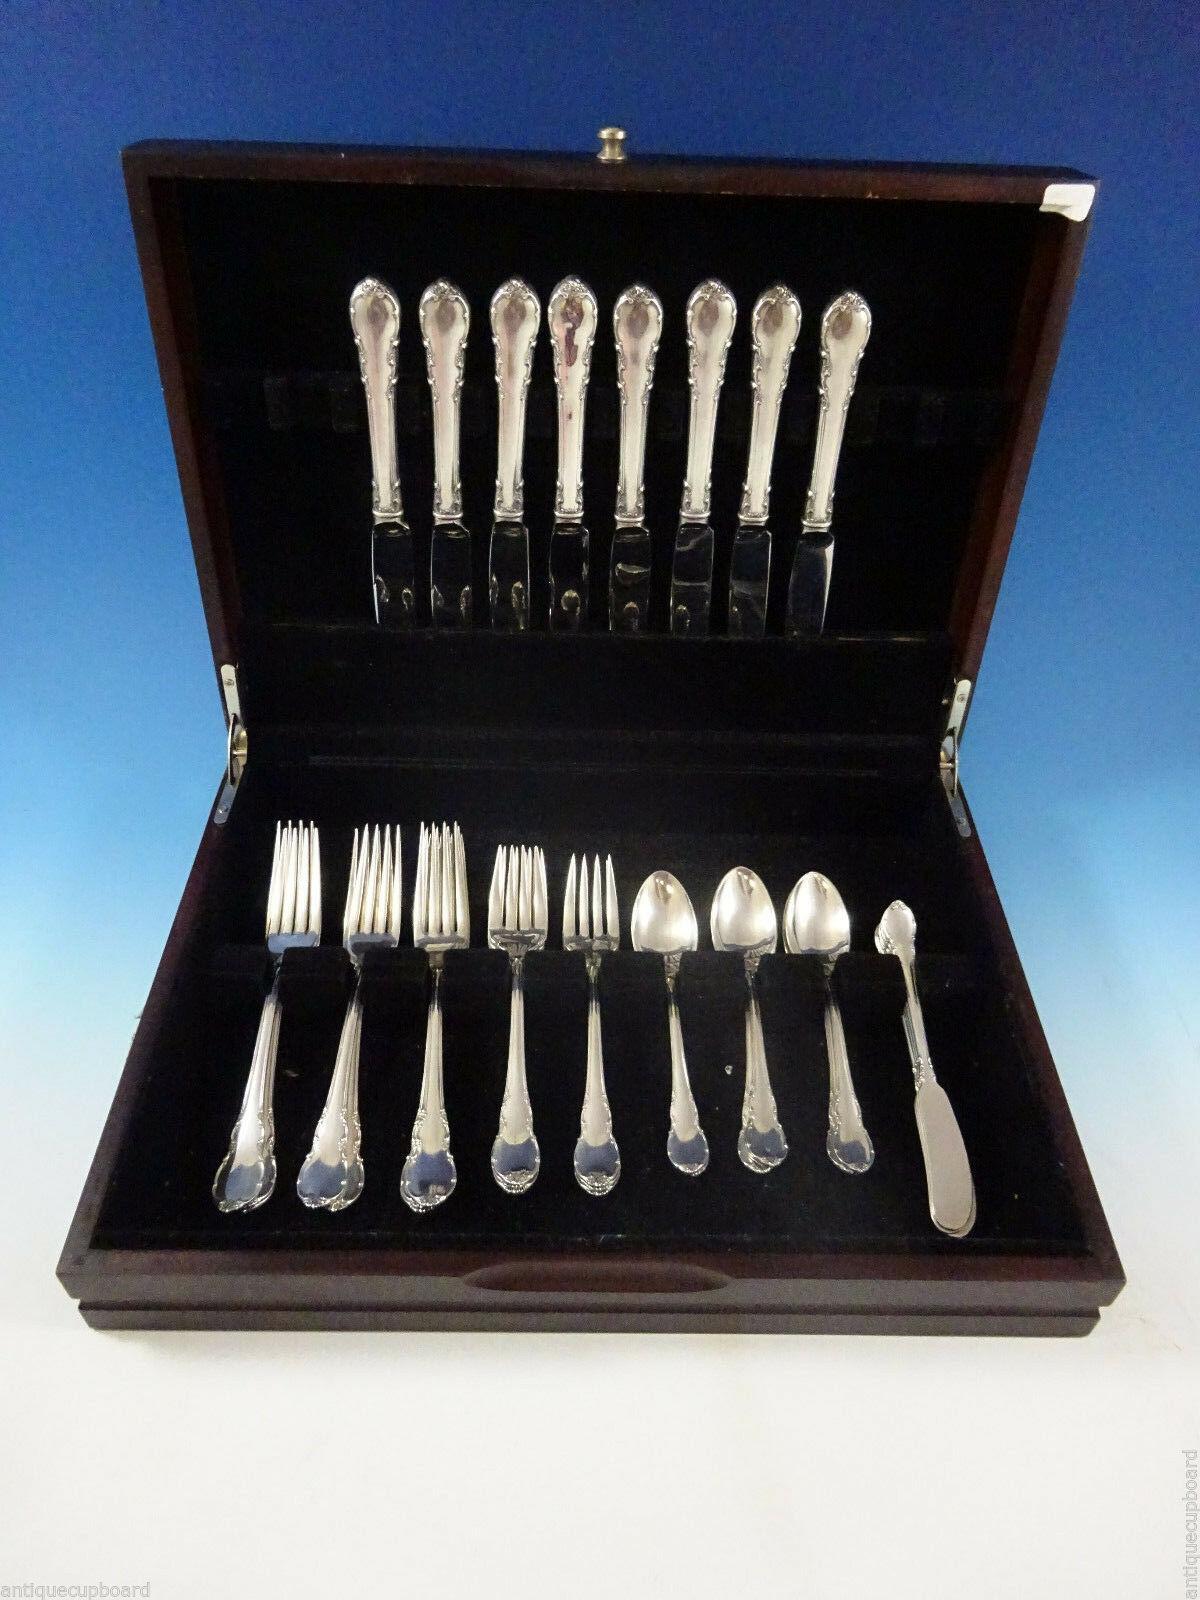 Modern Victorian by Lunt sterling silver flatware set, 40 pieces. This set includes:

8 knives, 8 3/4